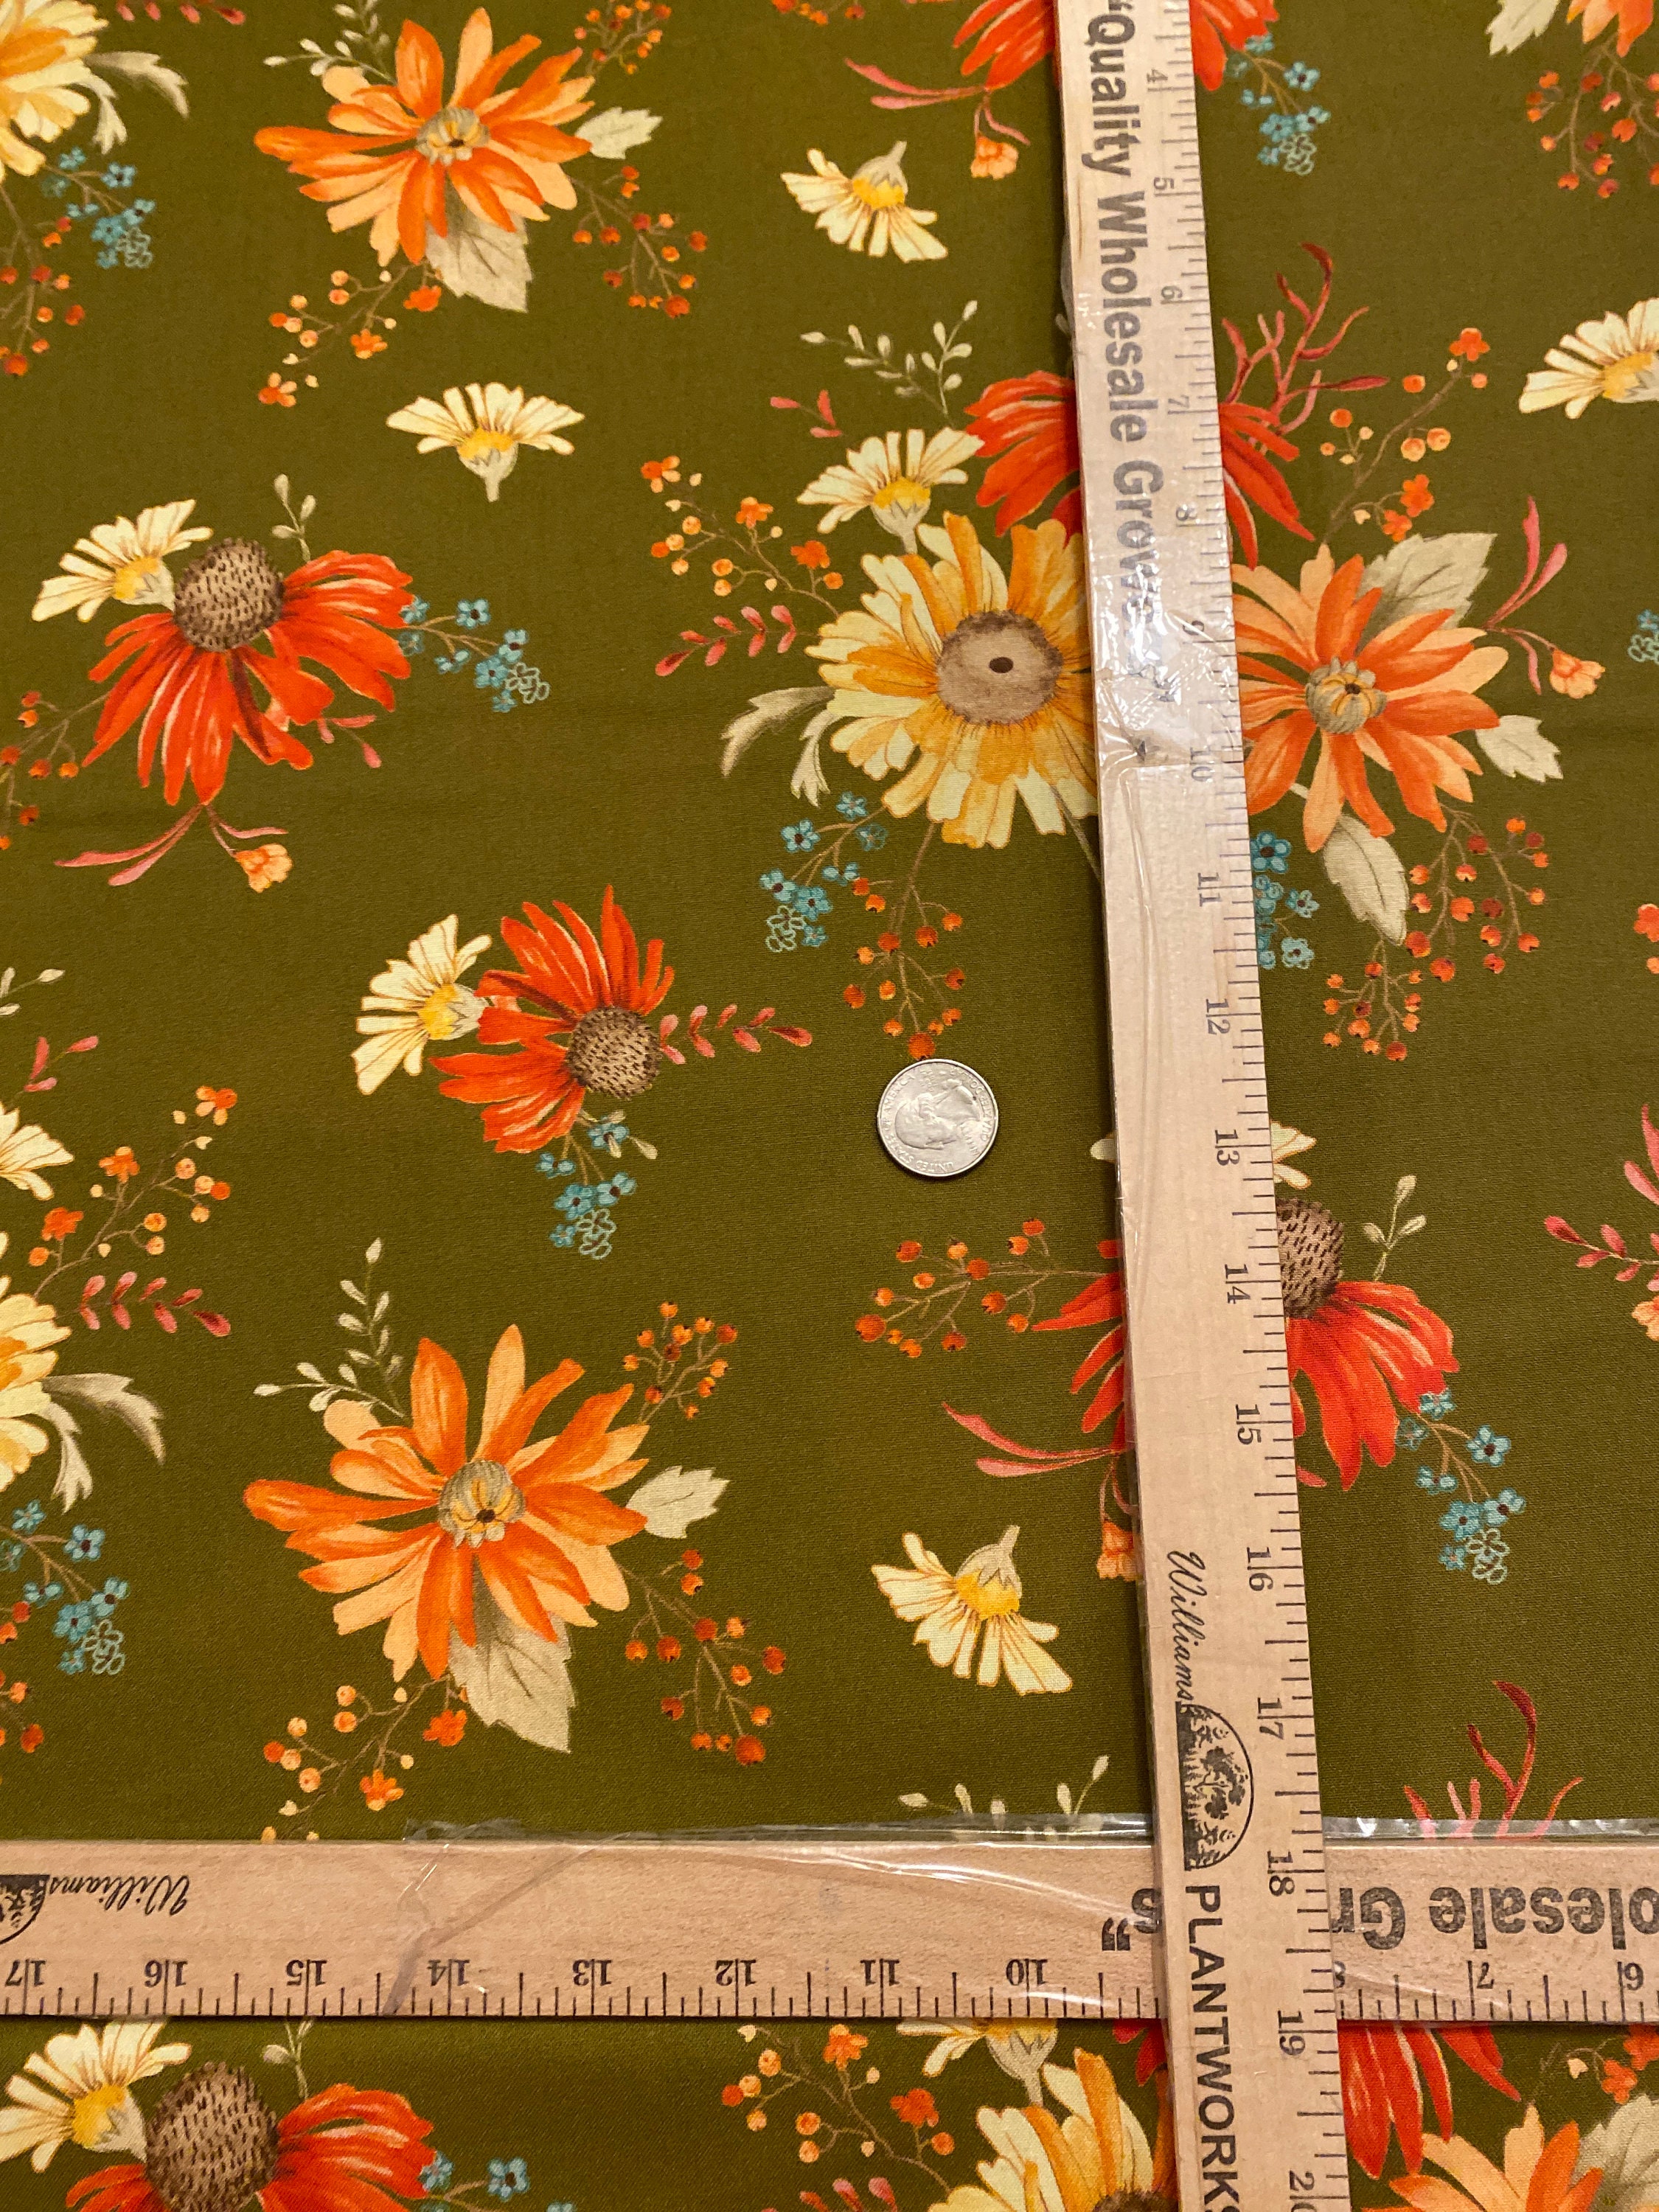 Dusty Fall Floral Fabric by the Yard. Watercolor Florals, Burgundy, Autumn,  Fall Fabric, Botanical. Quilt Cotton, Knit, Jersey or Minky 